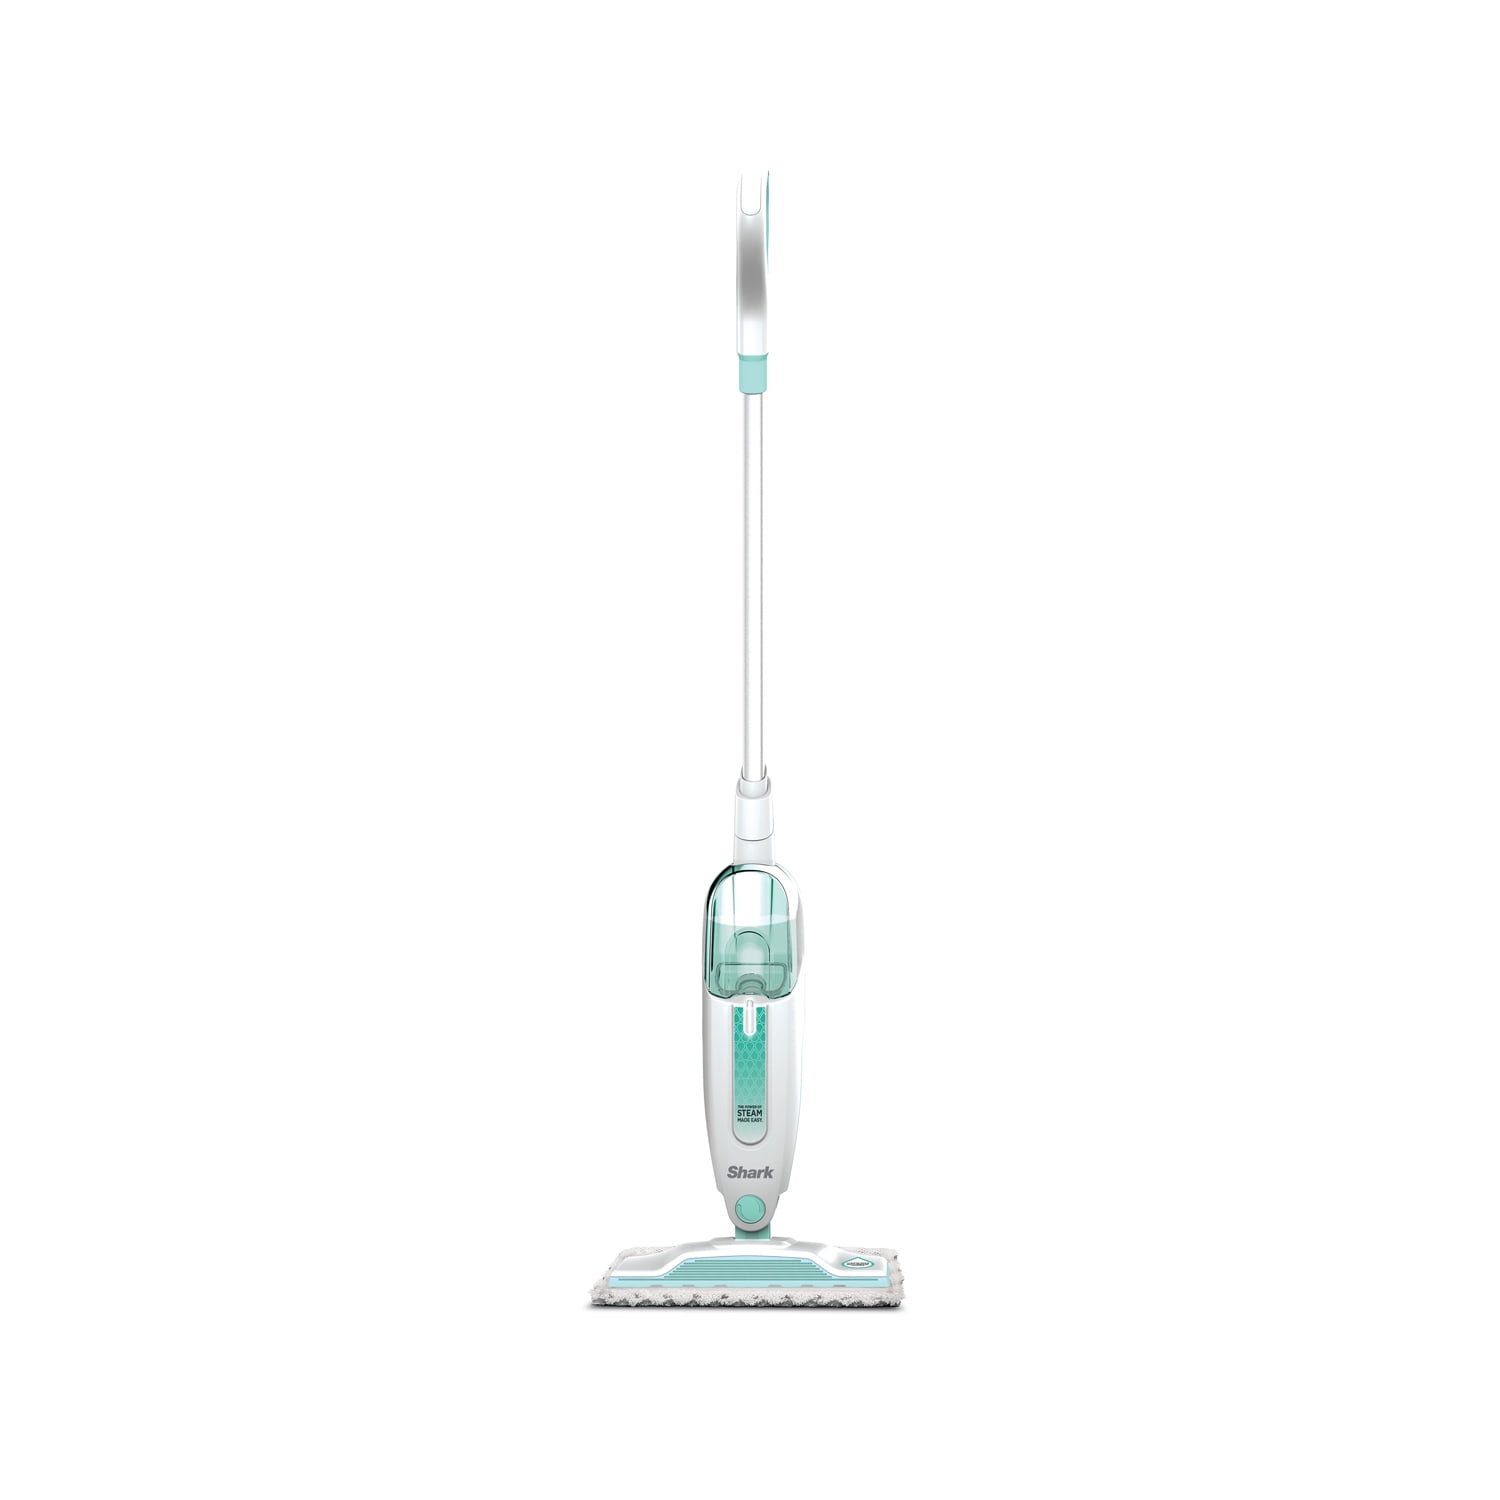 Shark Steam pocket mop w/ attachments and original box Details about   LOCAL TEXAS PICK UP ONLY 